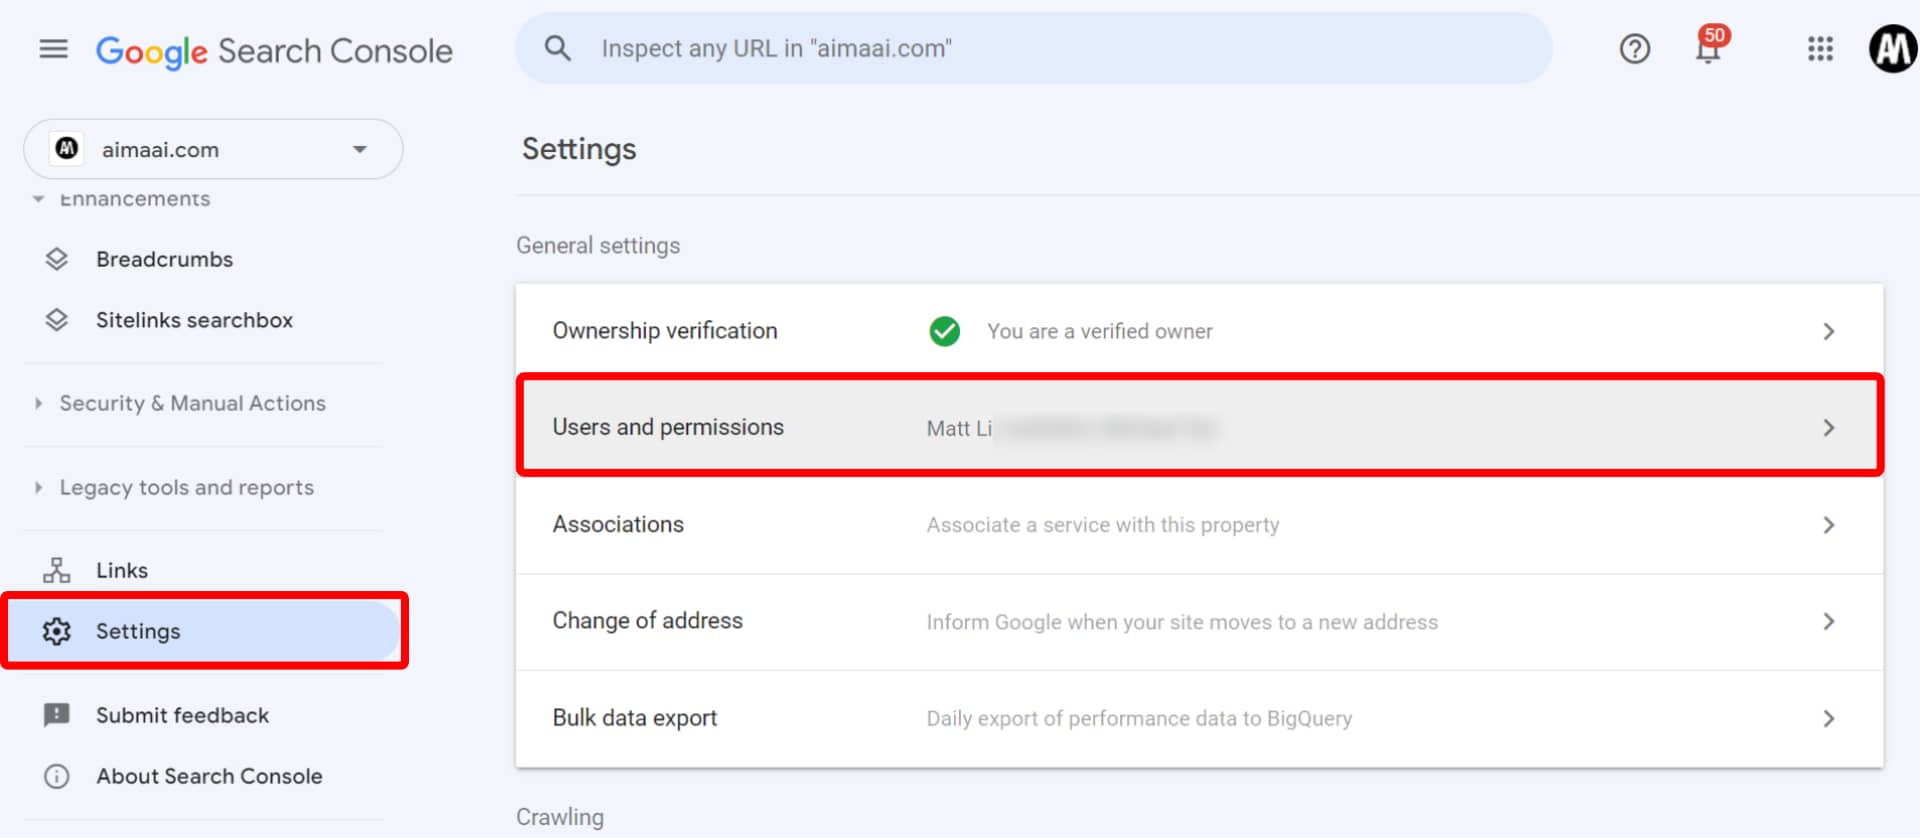 Screenshot of google search console settings menu highlighting the 'users and permissions' section.